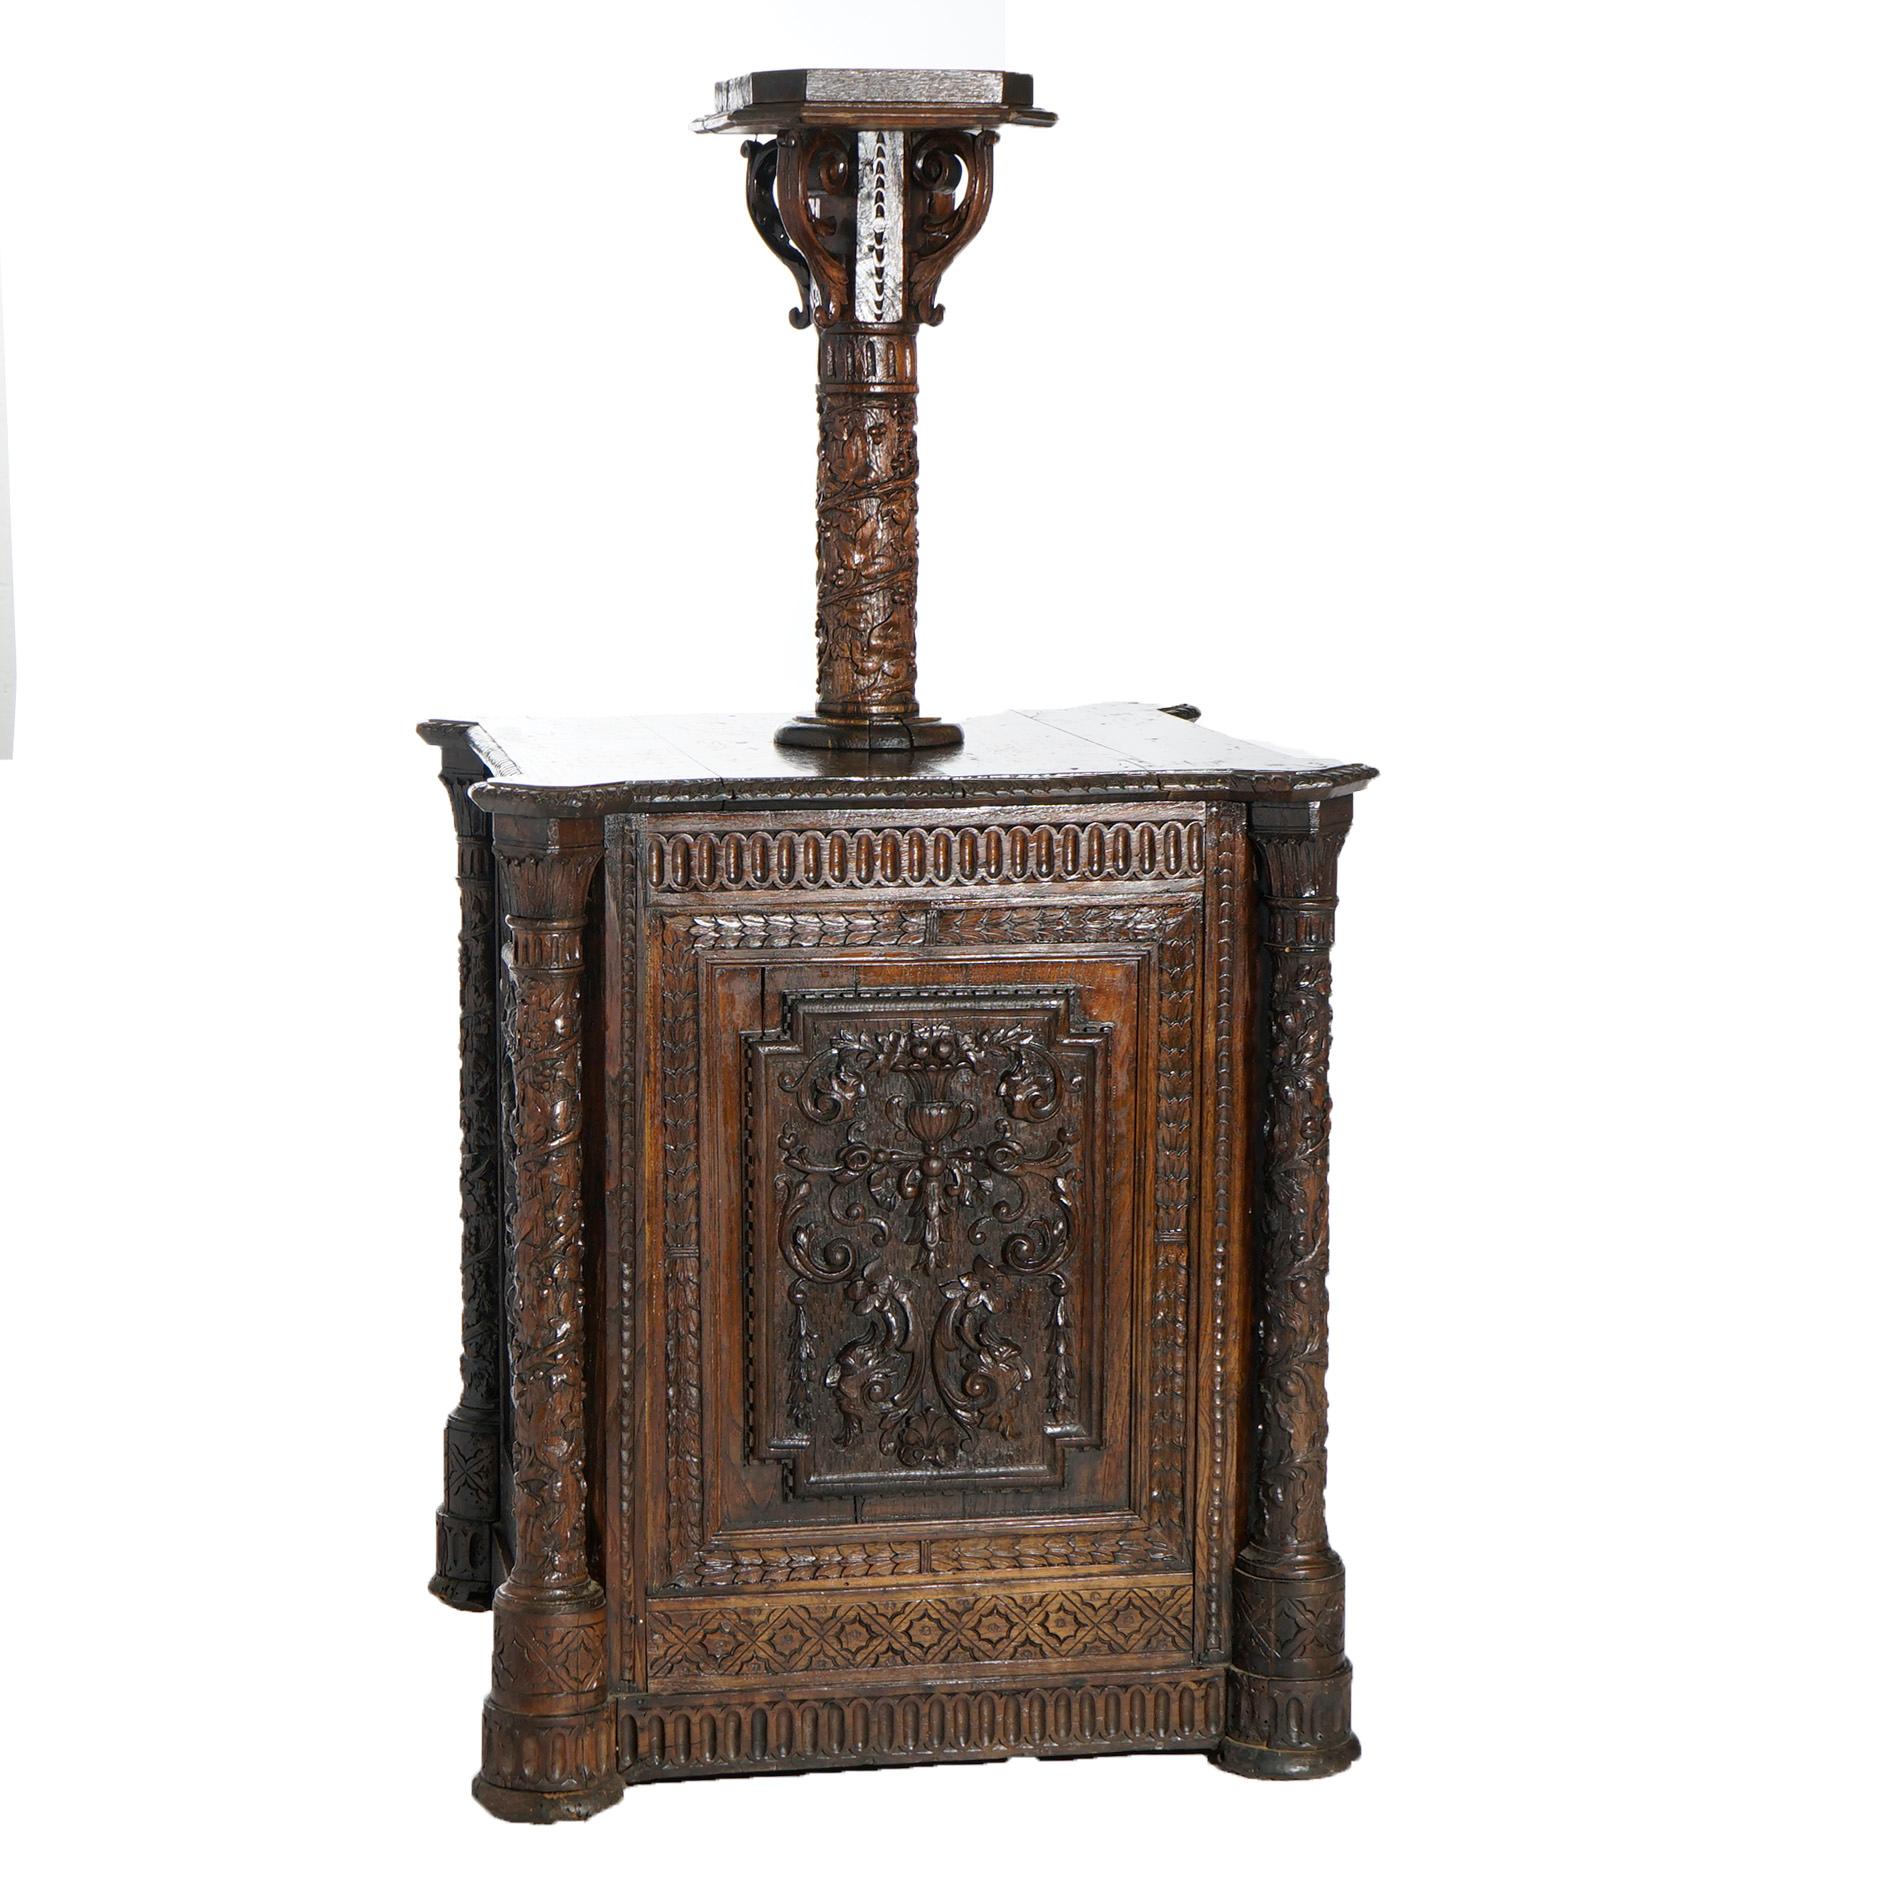 An early antique Continental reliquary cabinet offers deeply carved oak construction with central foliate column having square display with acanthus form corbels over single door cabinet base with carved flower urn, foliate and scroll carvings